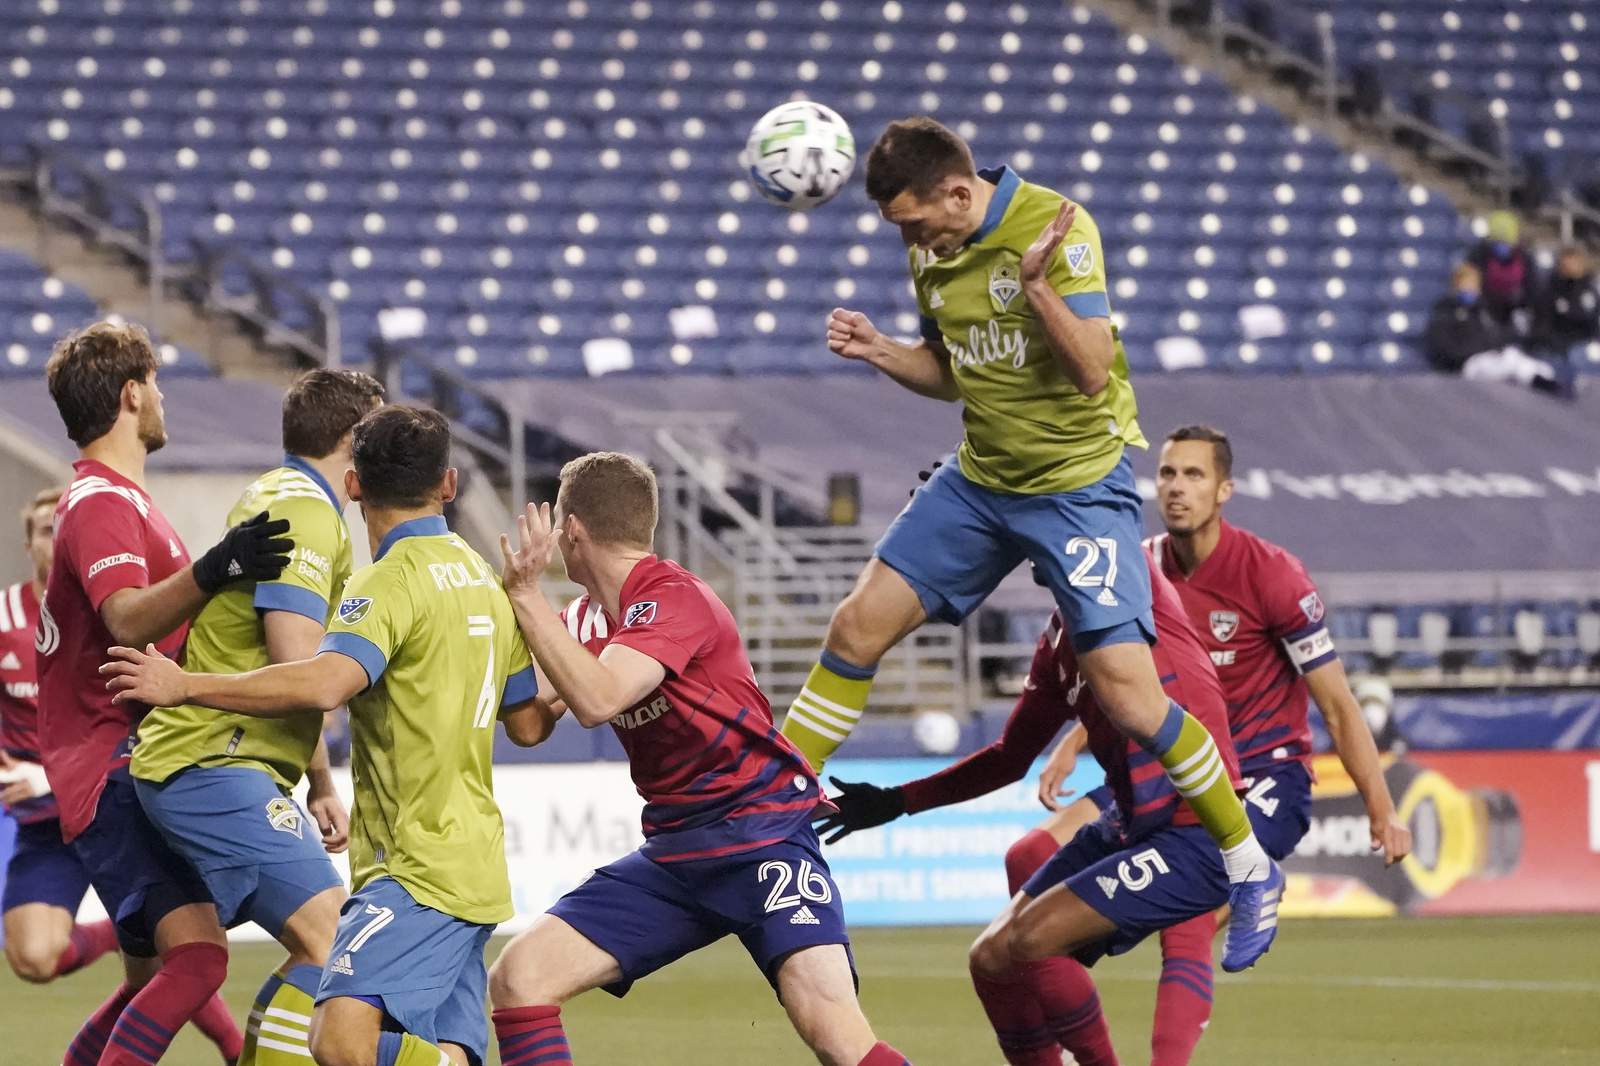 Sounders back in West final after 1-0 win over FC Dallas